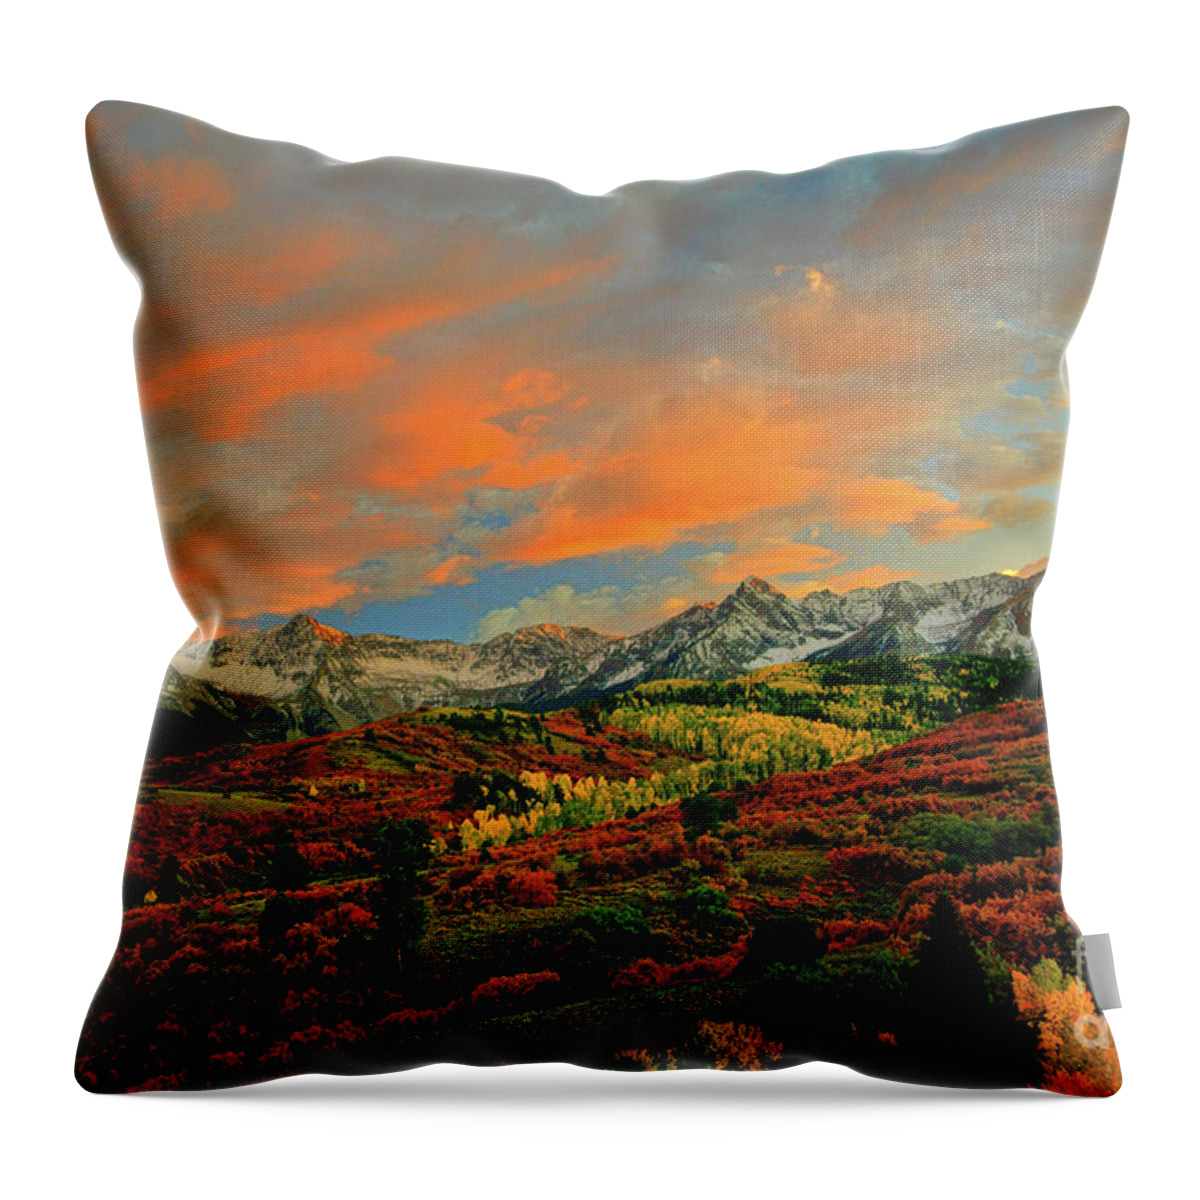 Colorado Throw Pillow featuring the photograph Dallas Divide Sunset - 2015 - 1 by Benedict Heekwan Yang